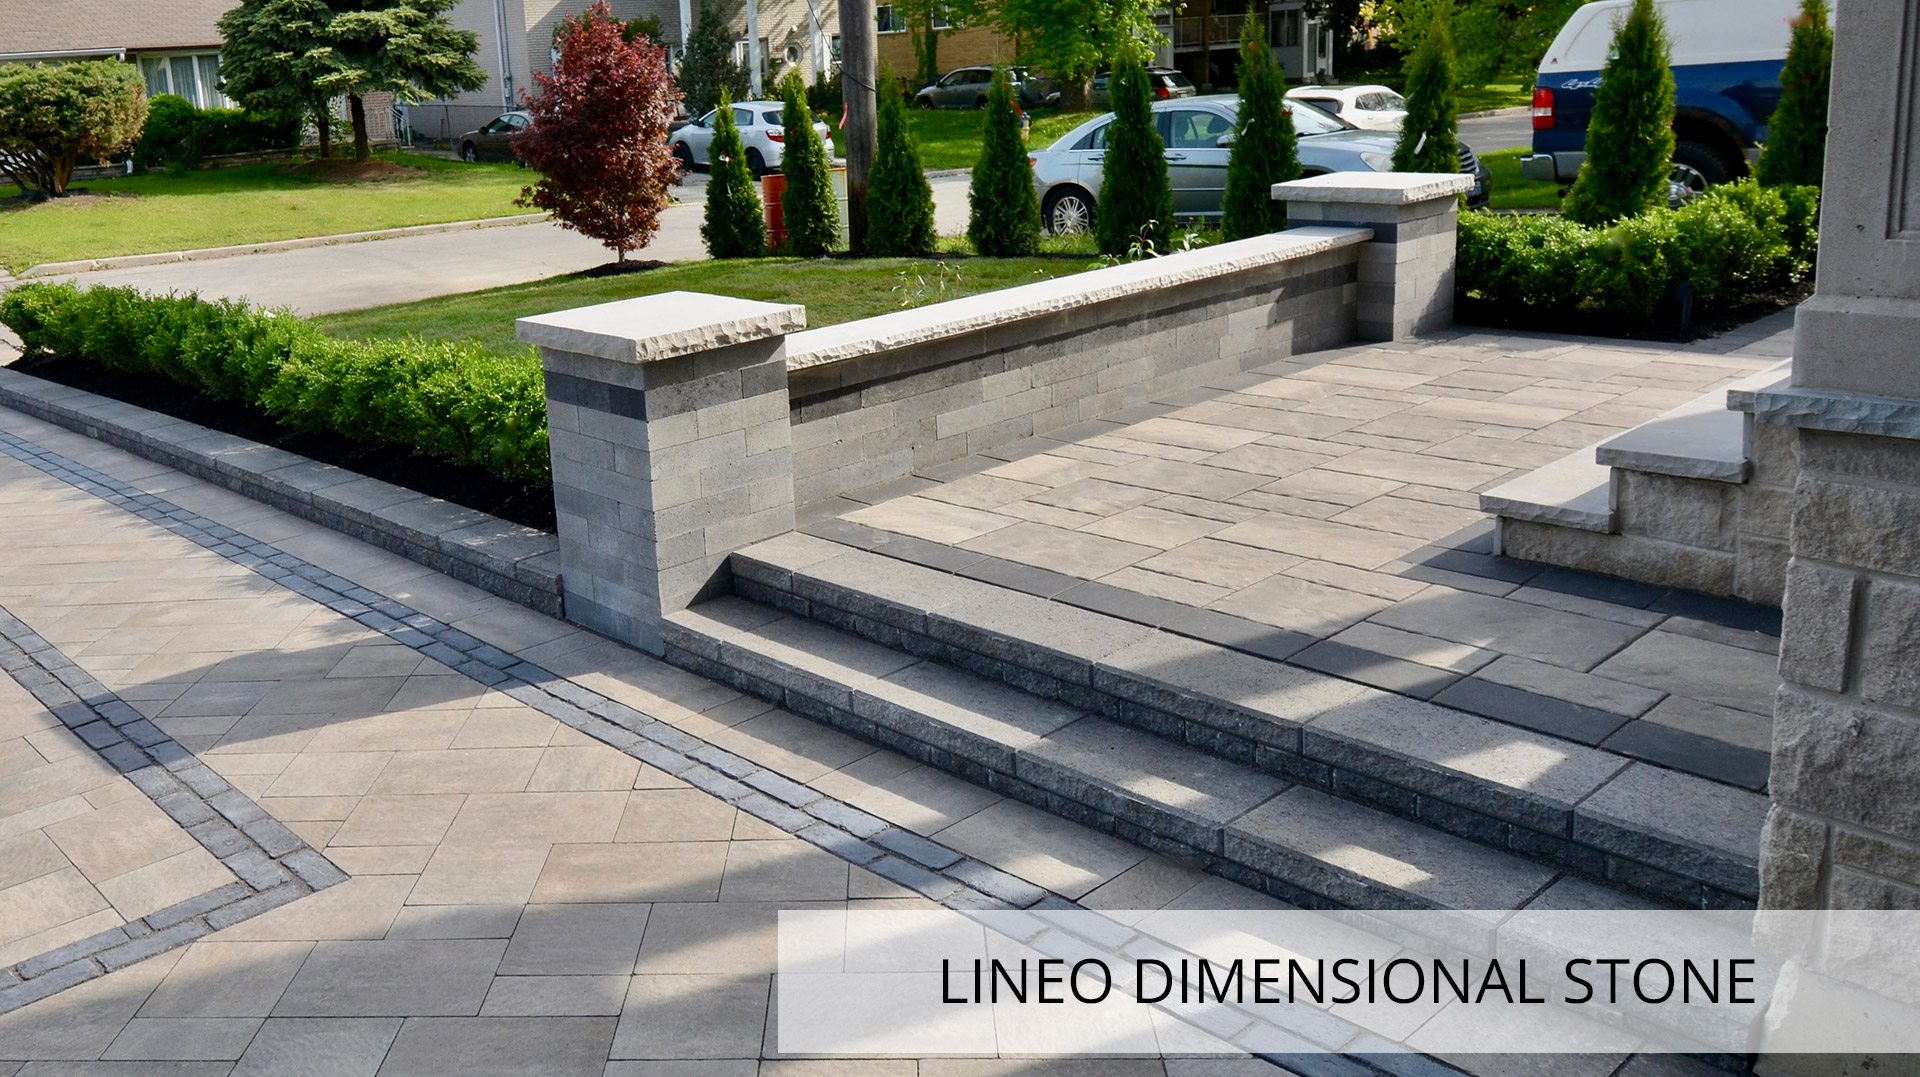 Lineo Dimensional stone